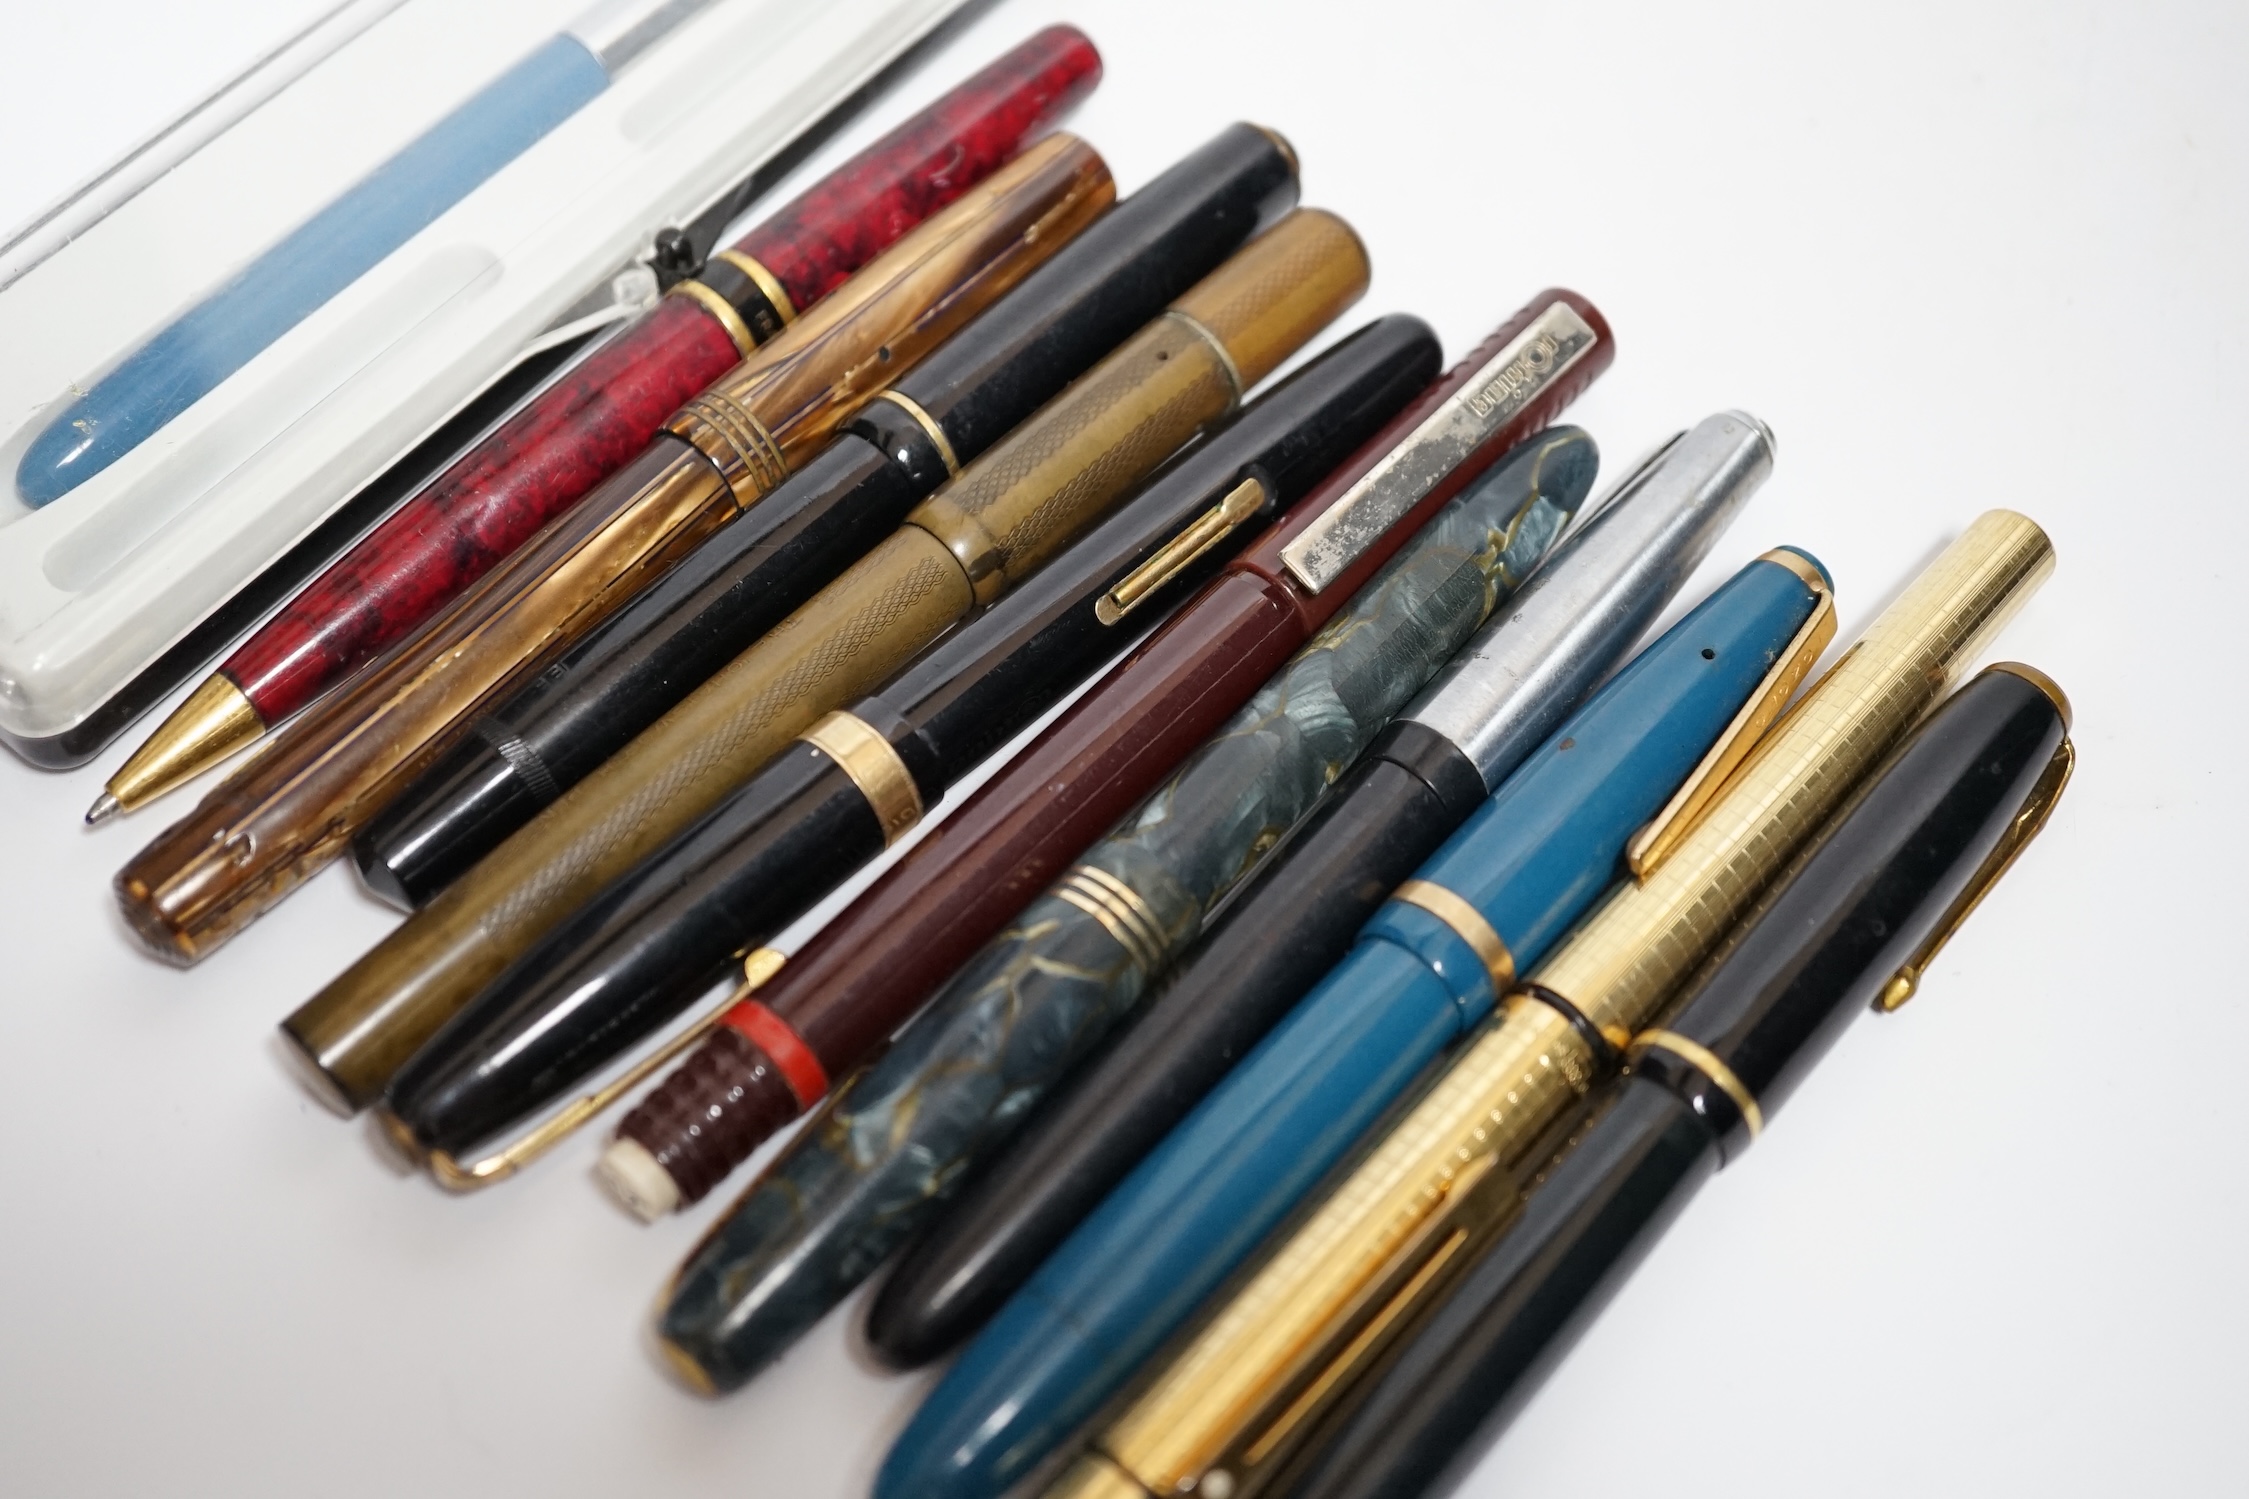 A quantity of fountain pens including Watermans and Sheaffer - Image 3 of 4